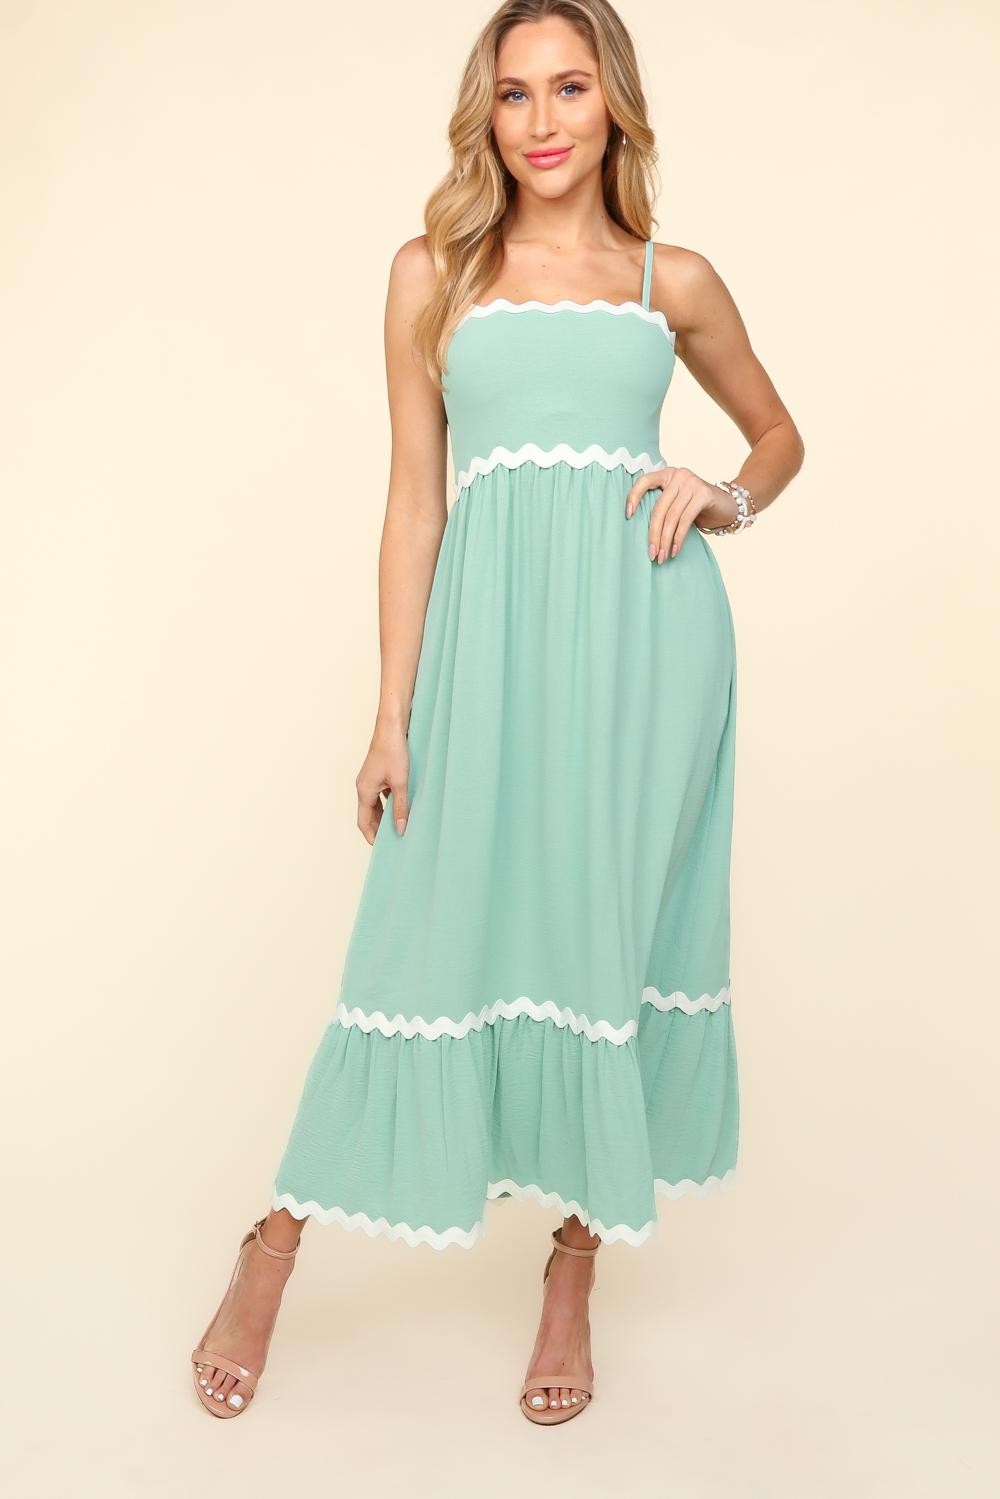 Haptics Solid Color Maxi Dress with Contrasting Ric Rac Trim in Sage